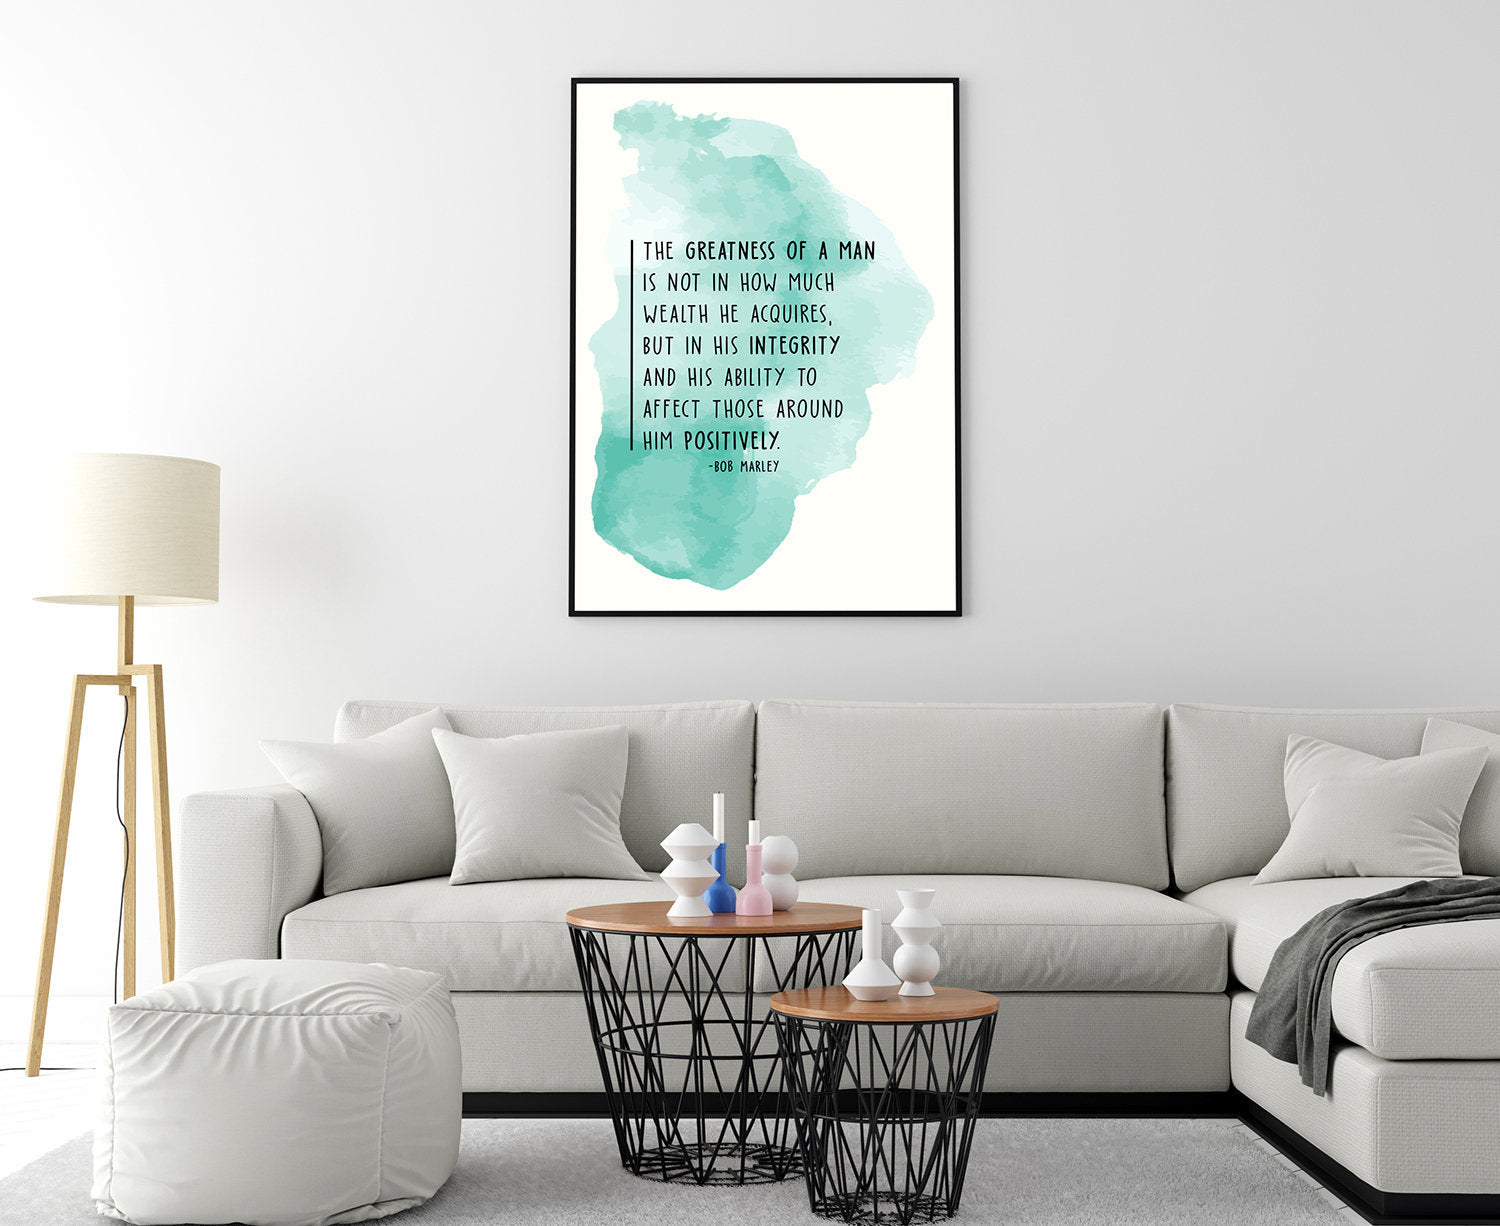 The Greatness of a Man..Bob marley quote,Home decor wall art,Quote poster Print, Office wall art,Living room wall decor,Dorm wall art,POSTER